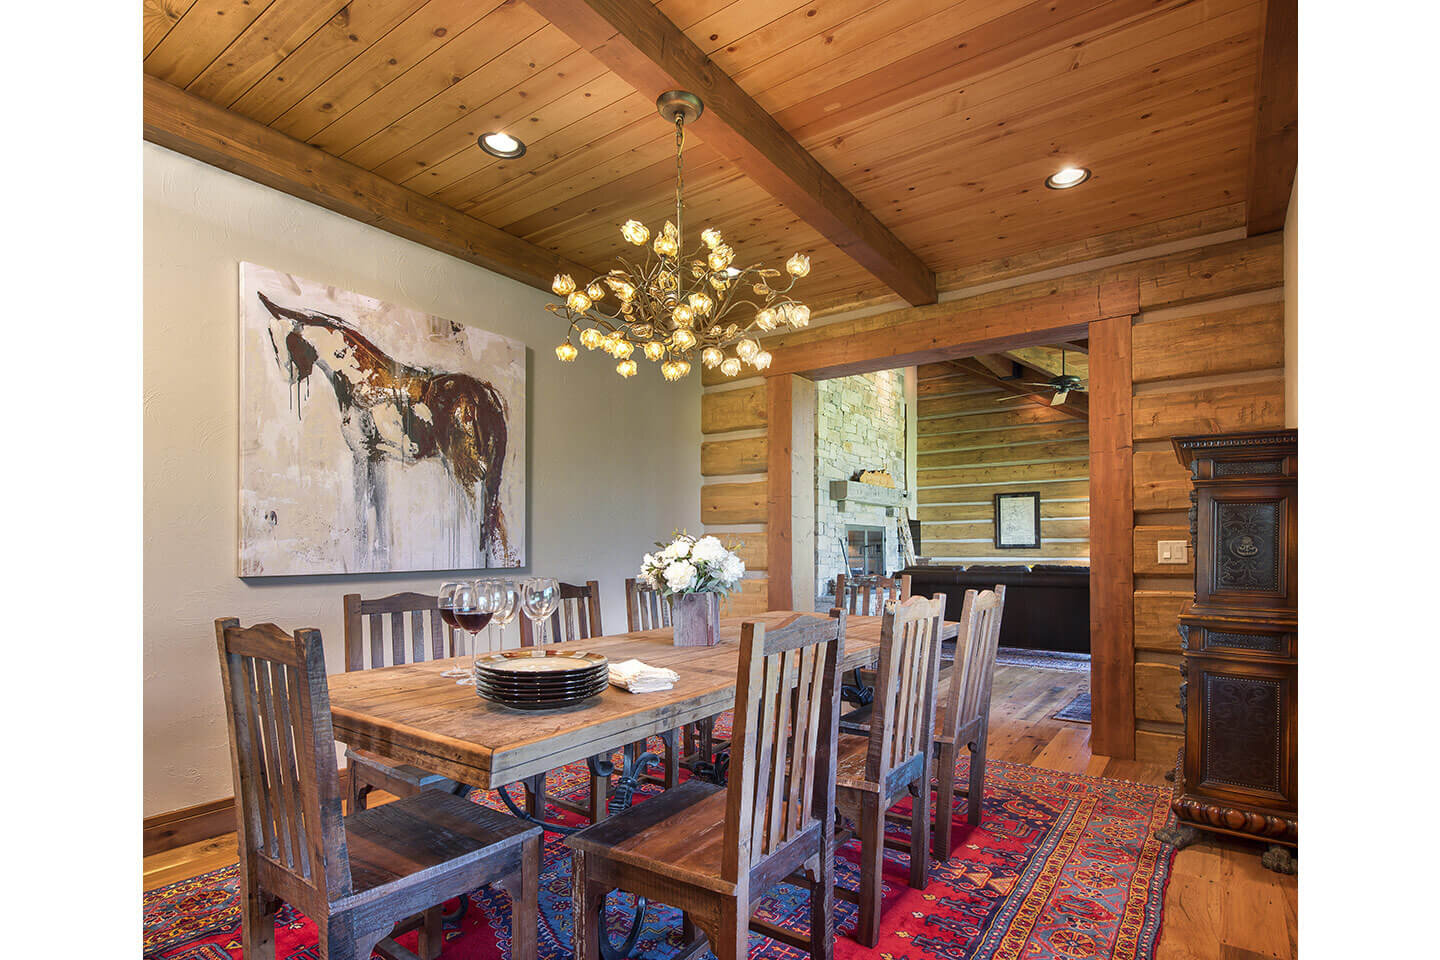 Dining room with log walls and rustic furniture